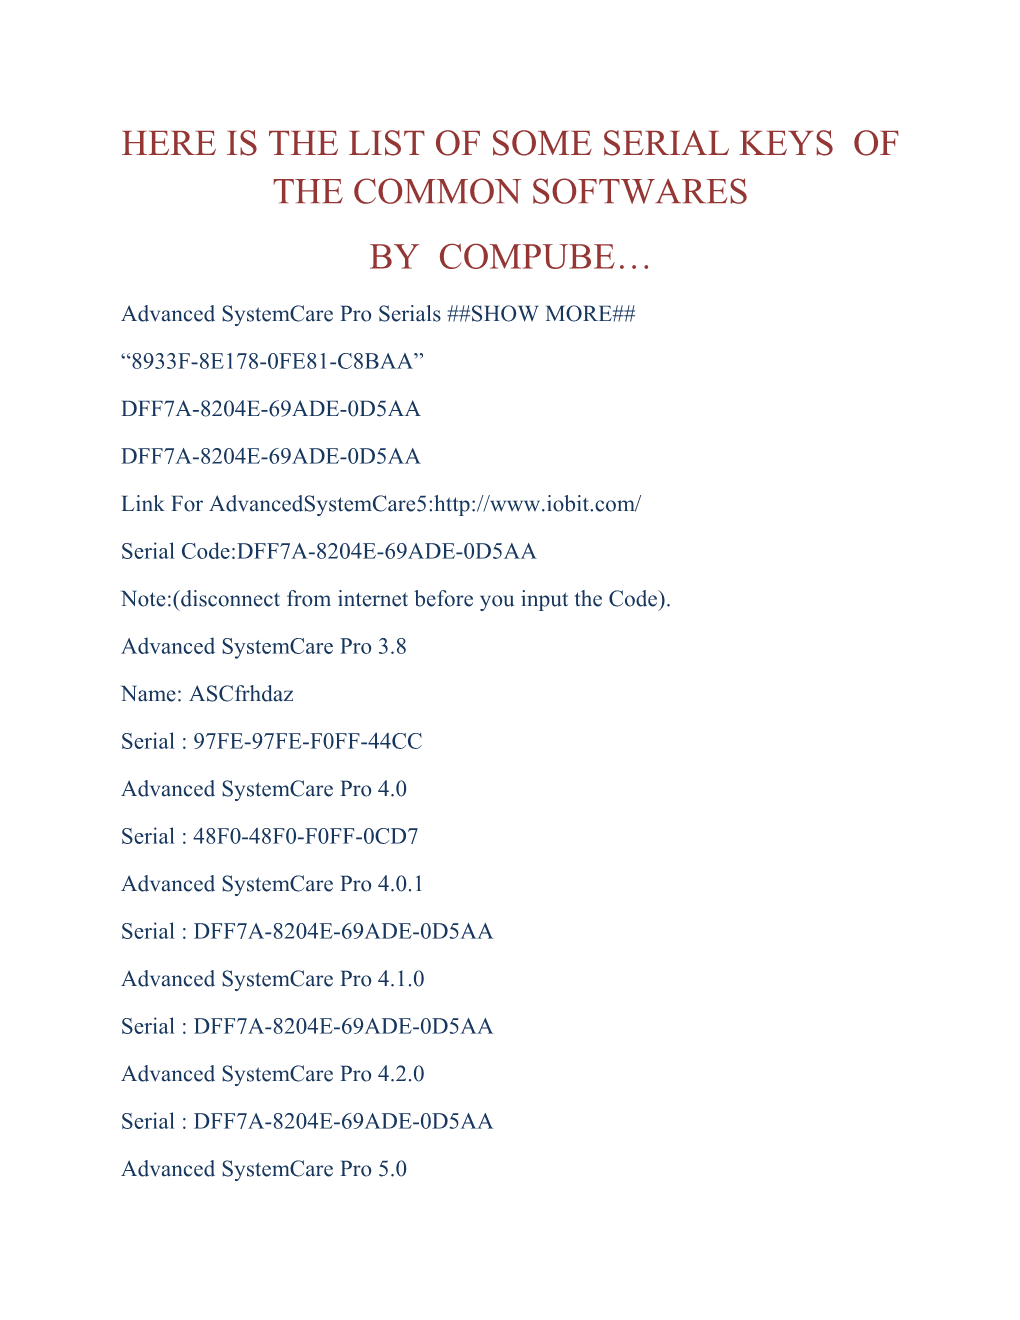 Here Is the List of Some Serial Keys of the Common Softwares